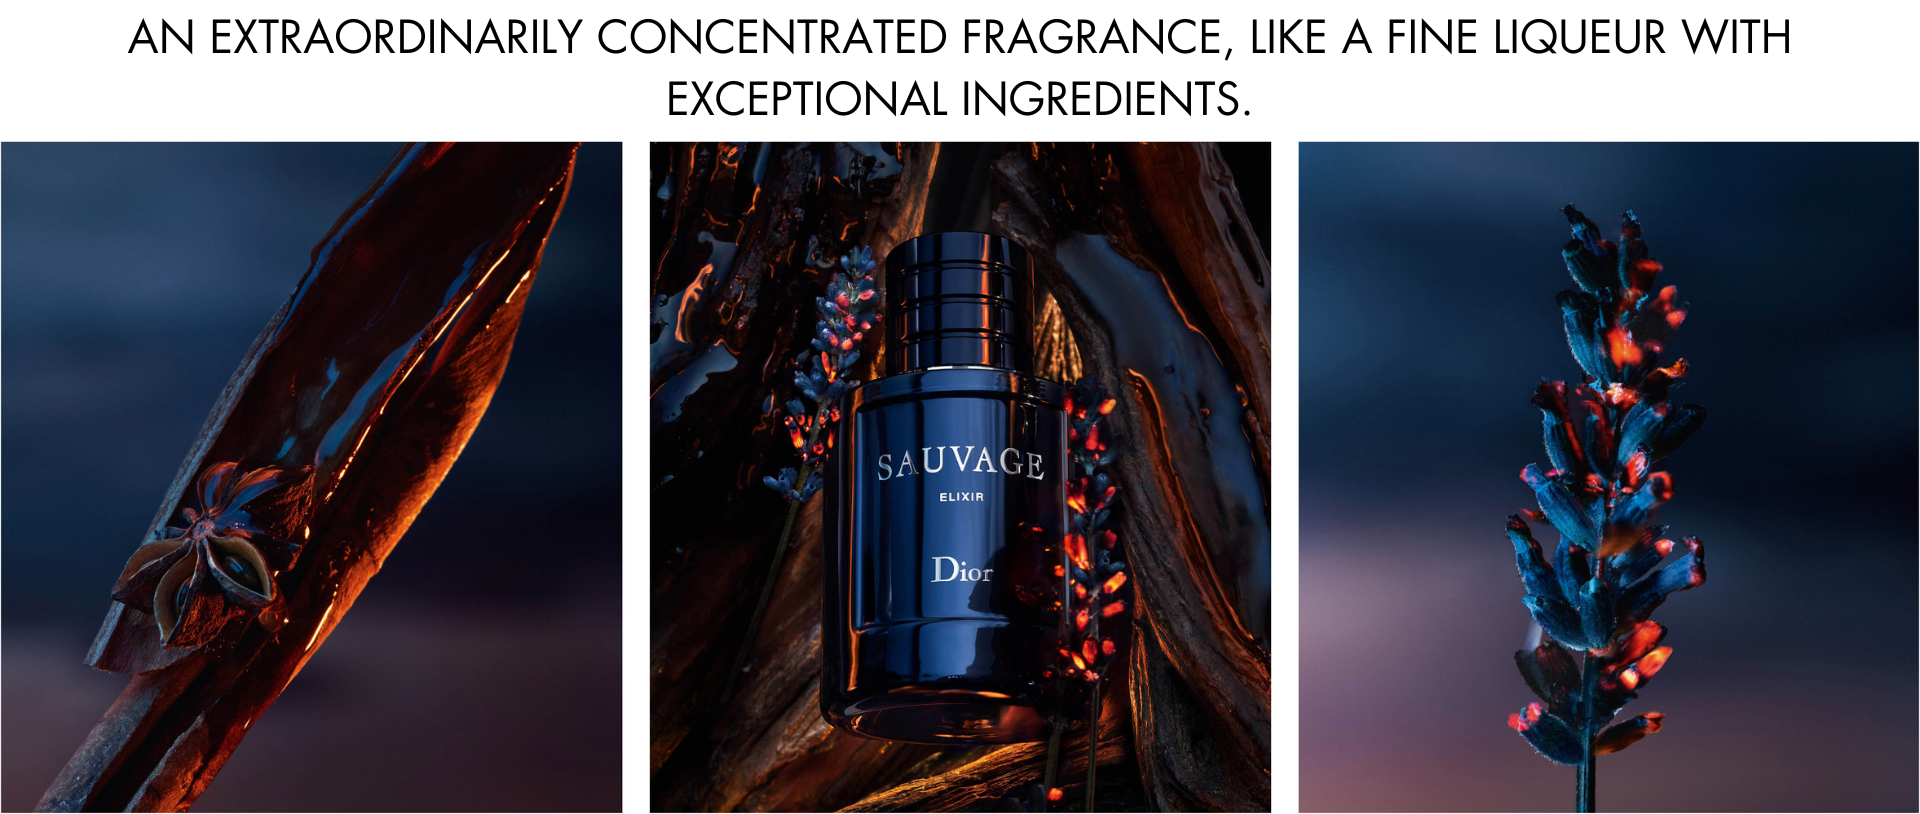 About Dior Sauvage Elixir Fragrance Notes
